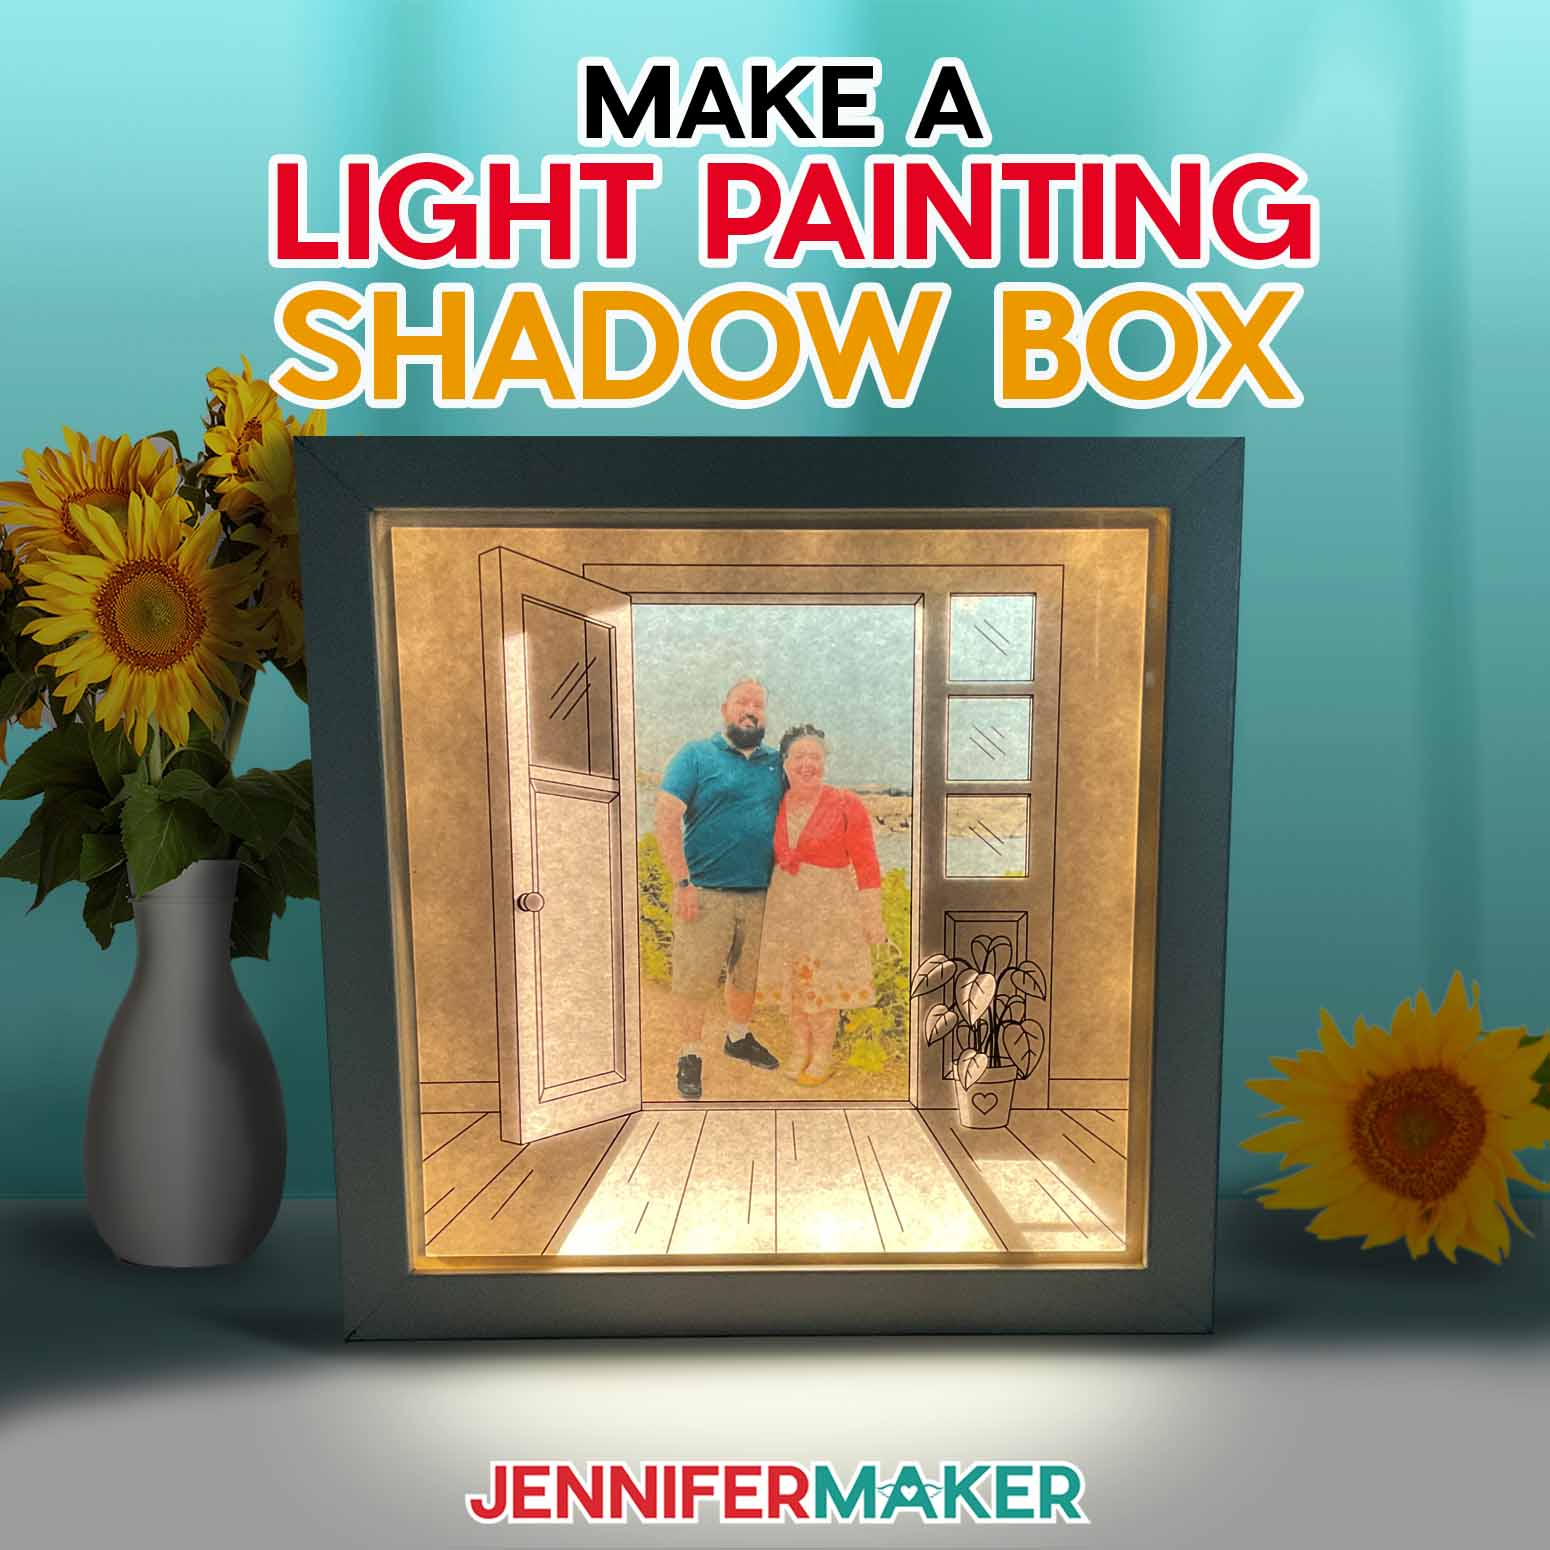 Make a light painting shadow box with JenniferMaker's tutorial! An illuminated shadowbox frame sits upon a table surrounded by sunflowers and a pretty blue backdrop. The shadowbox features a drawn doorway image with a real photo of Jennifer and Greg inside. The lights inside the box cast light rays across the floor of the image.